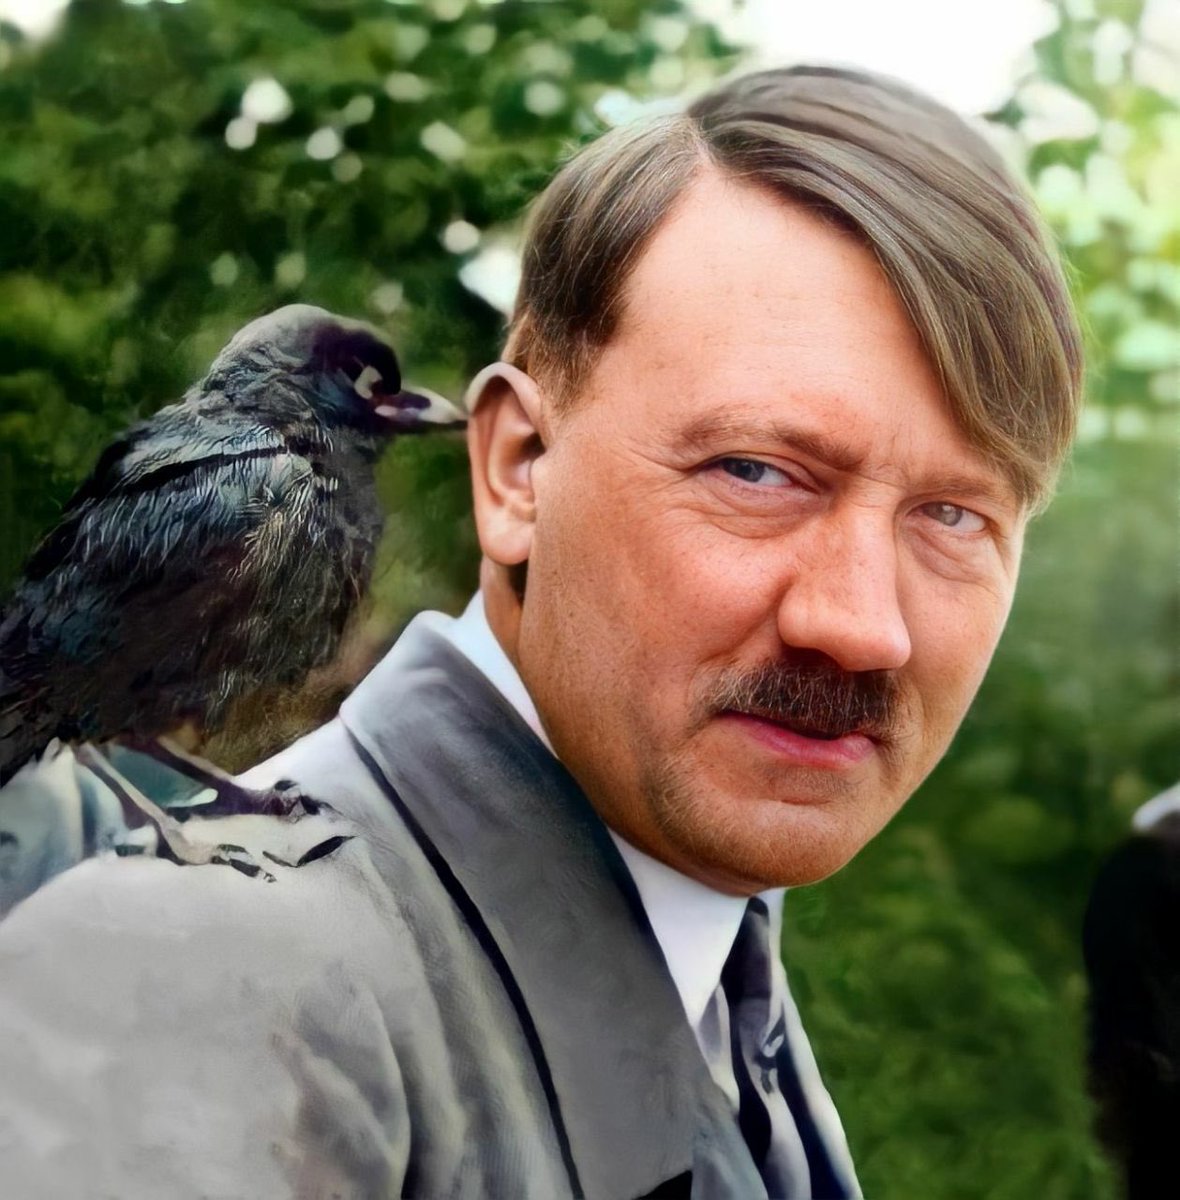 Adolf Hitler in HD color (real) with a wild bird.

Adolf Hitler was a vegetarian. He was a man of compassion and he recognized the importance of compassion in society. He had so much affection for his German shepherds. He banned all animal experimentation, recognizing it to be…